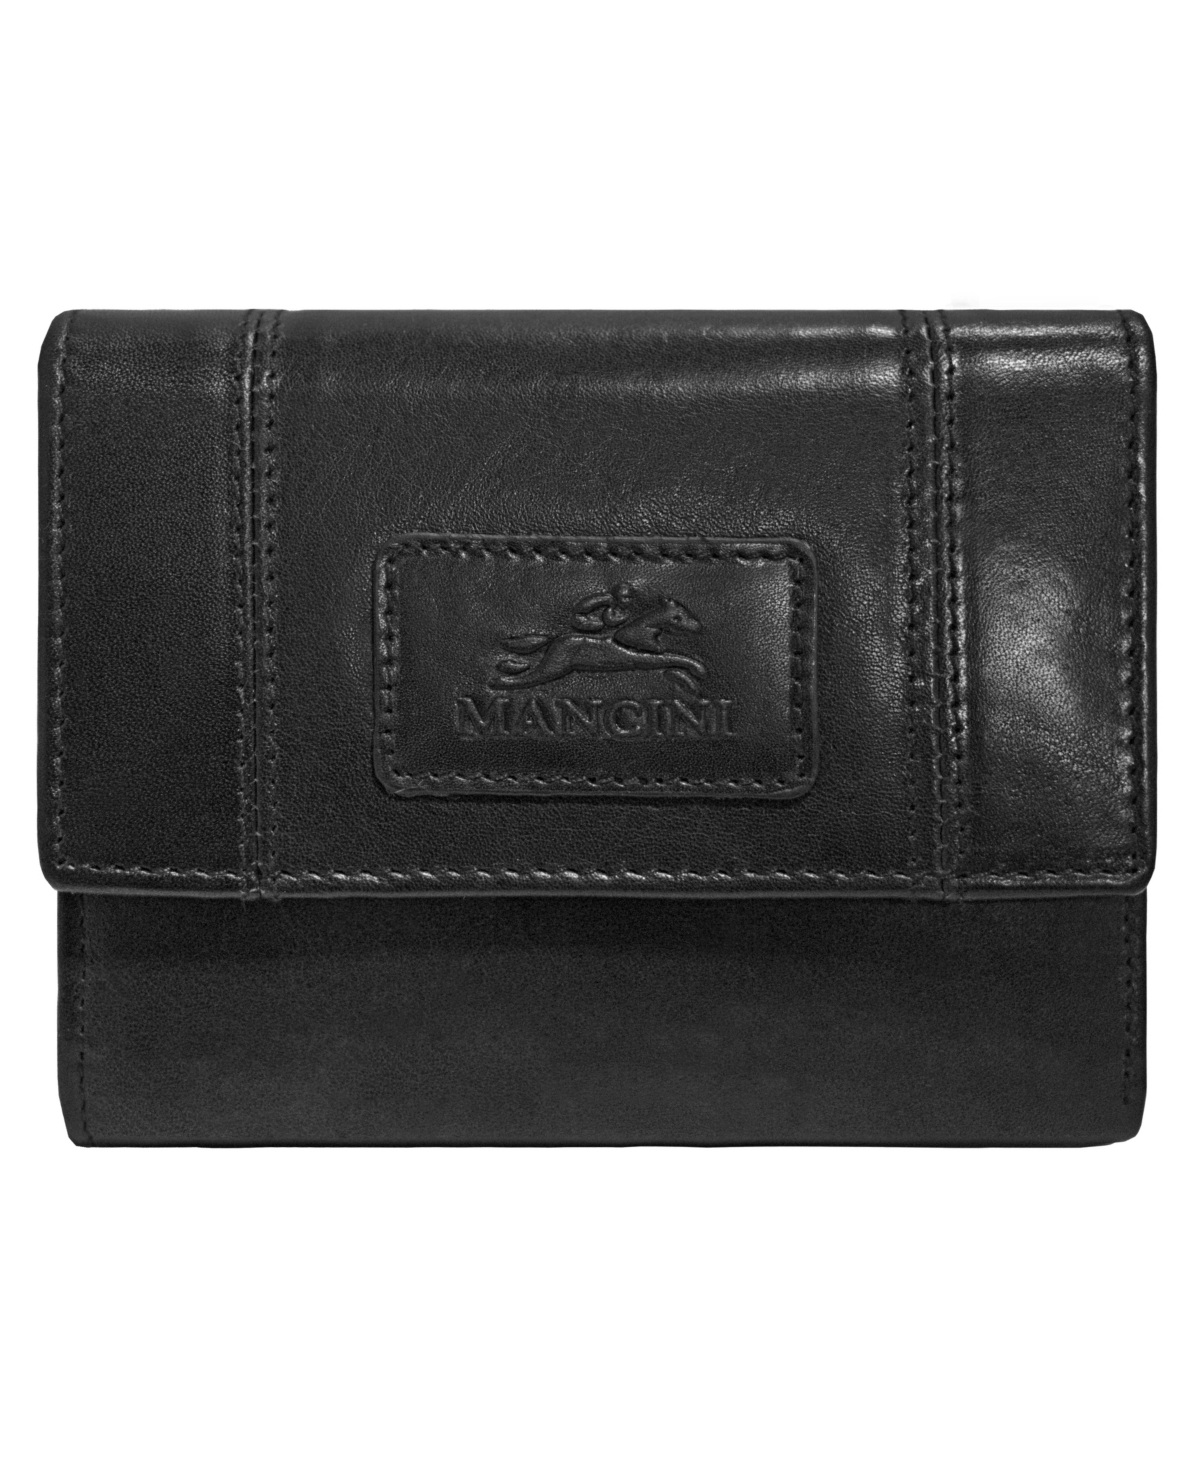 Mancini Casablanca Collection Rfid Secure Ladies Small Clutch Wallet